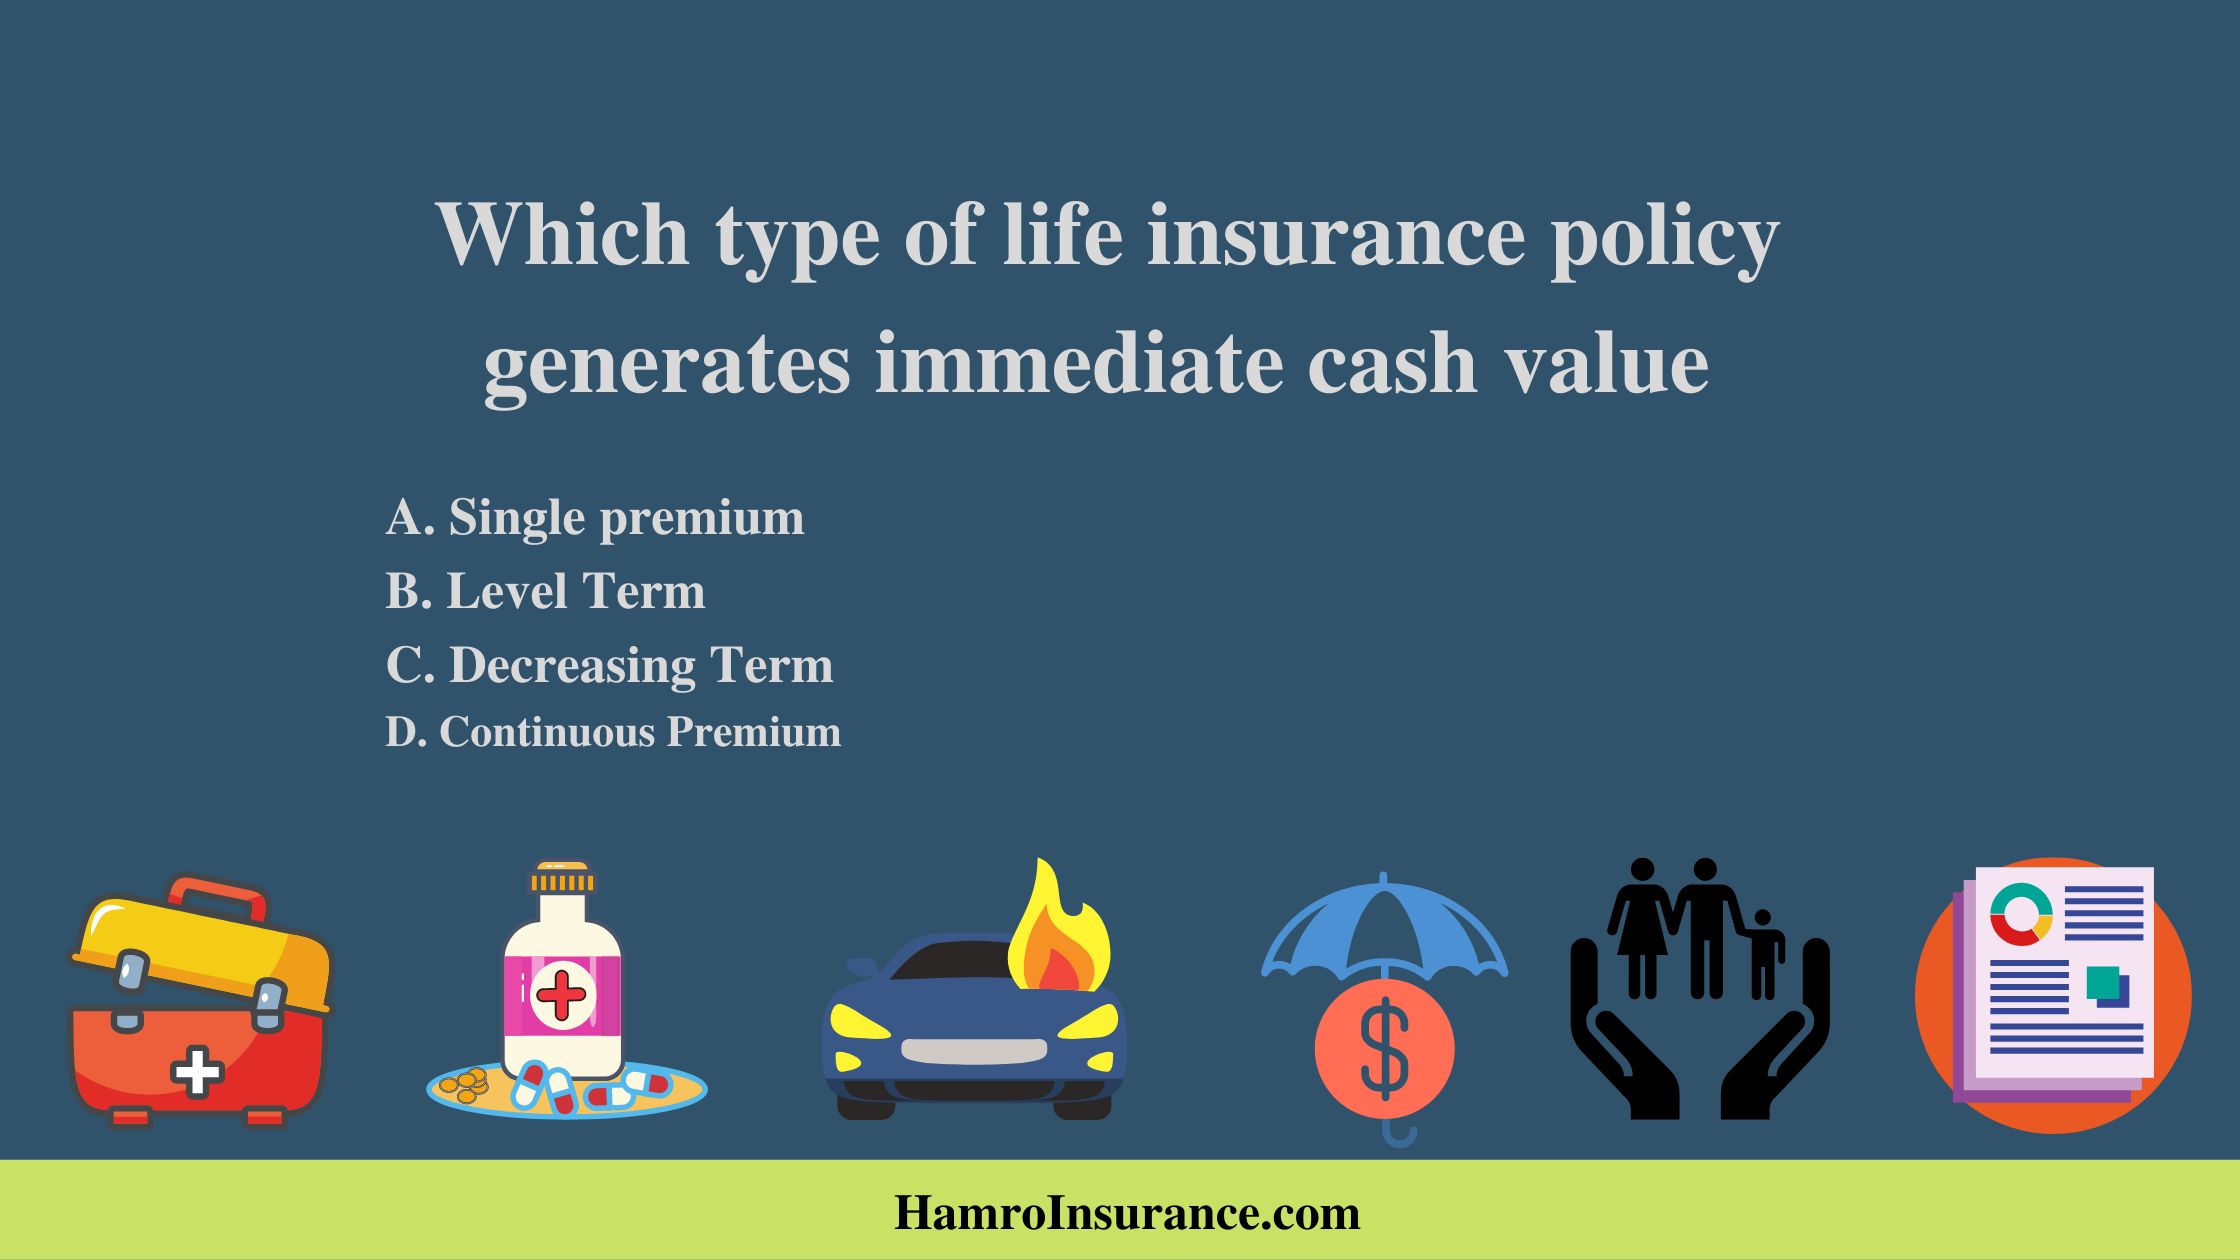 Which type of life insurance policy generates immediate cash value